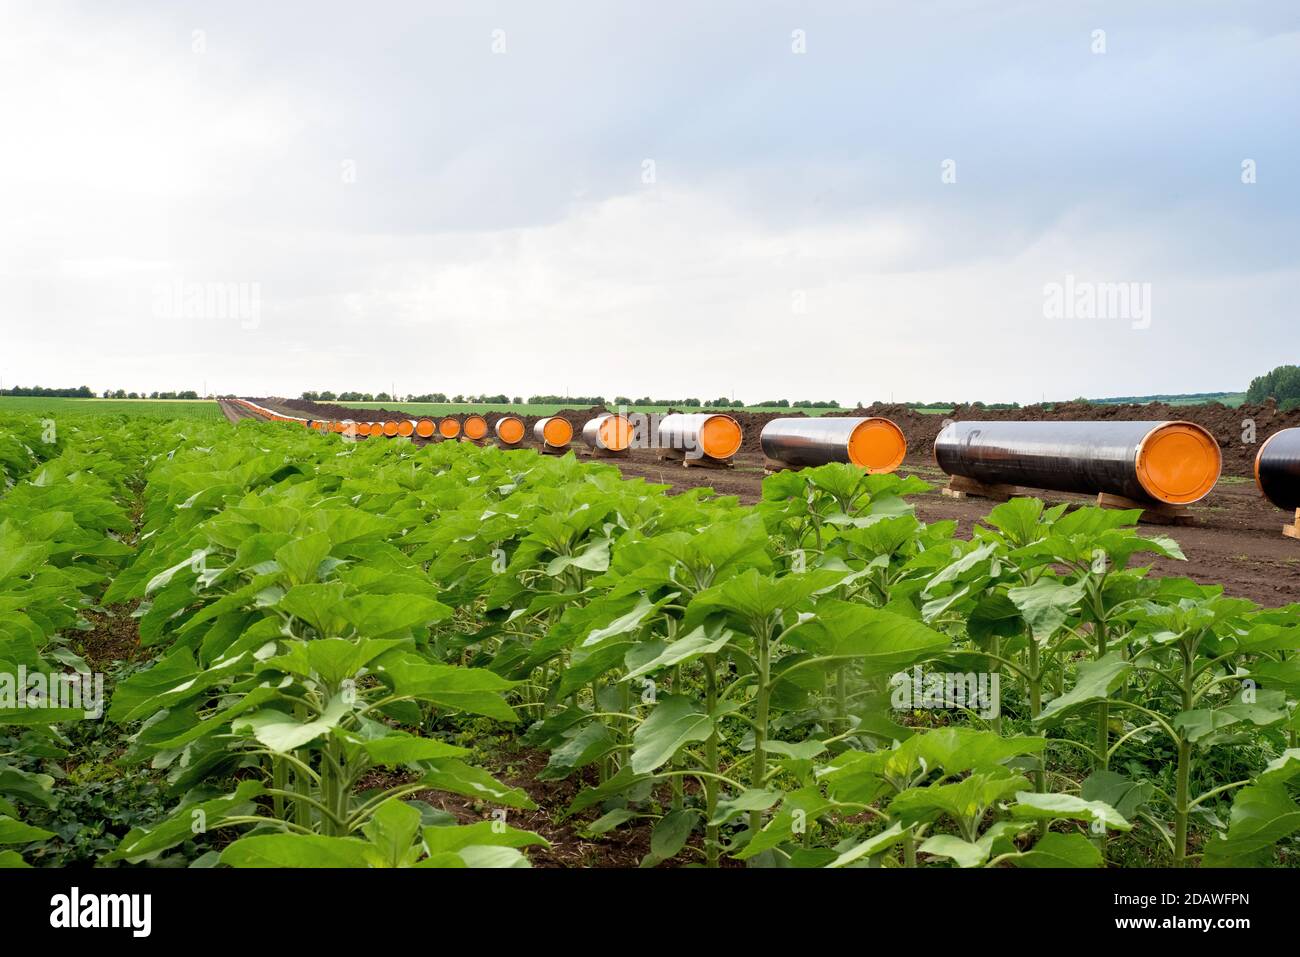 Construction works for gas-transmission pipeline in sunflower field. Stock Photo